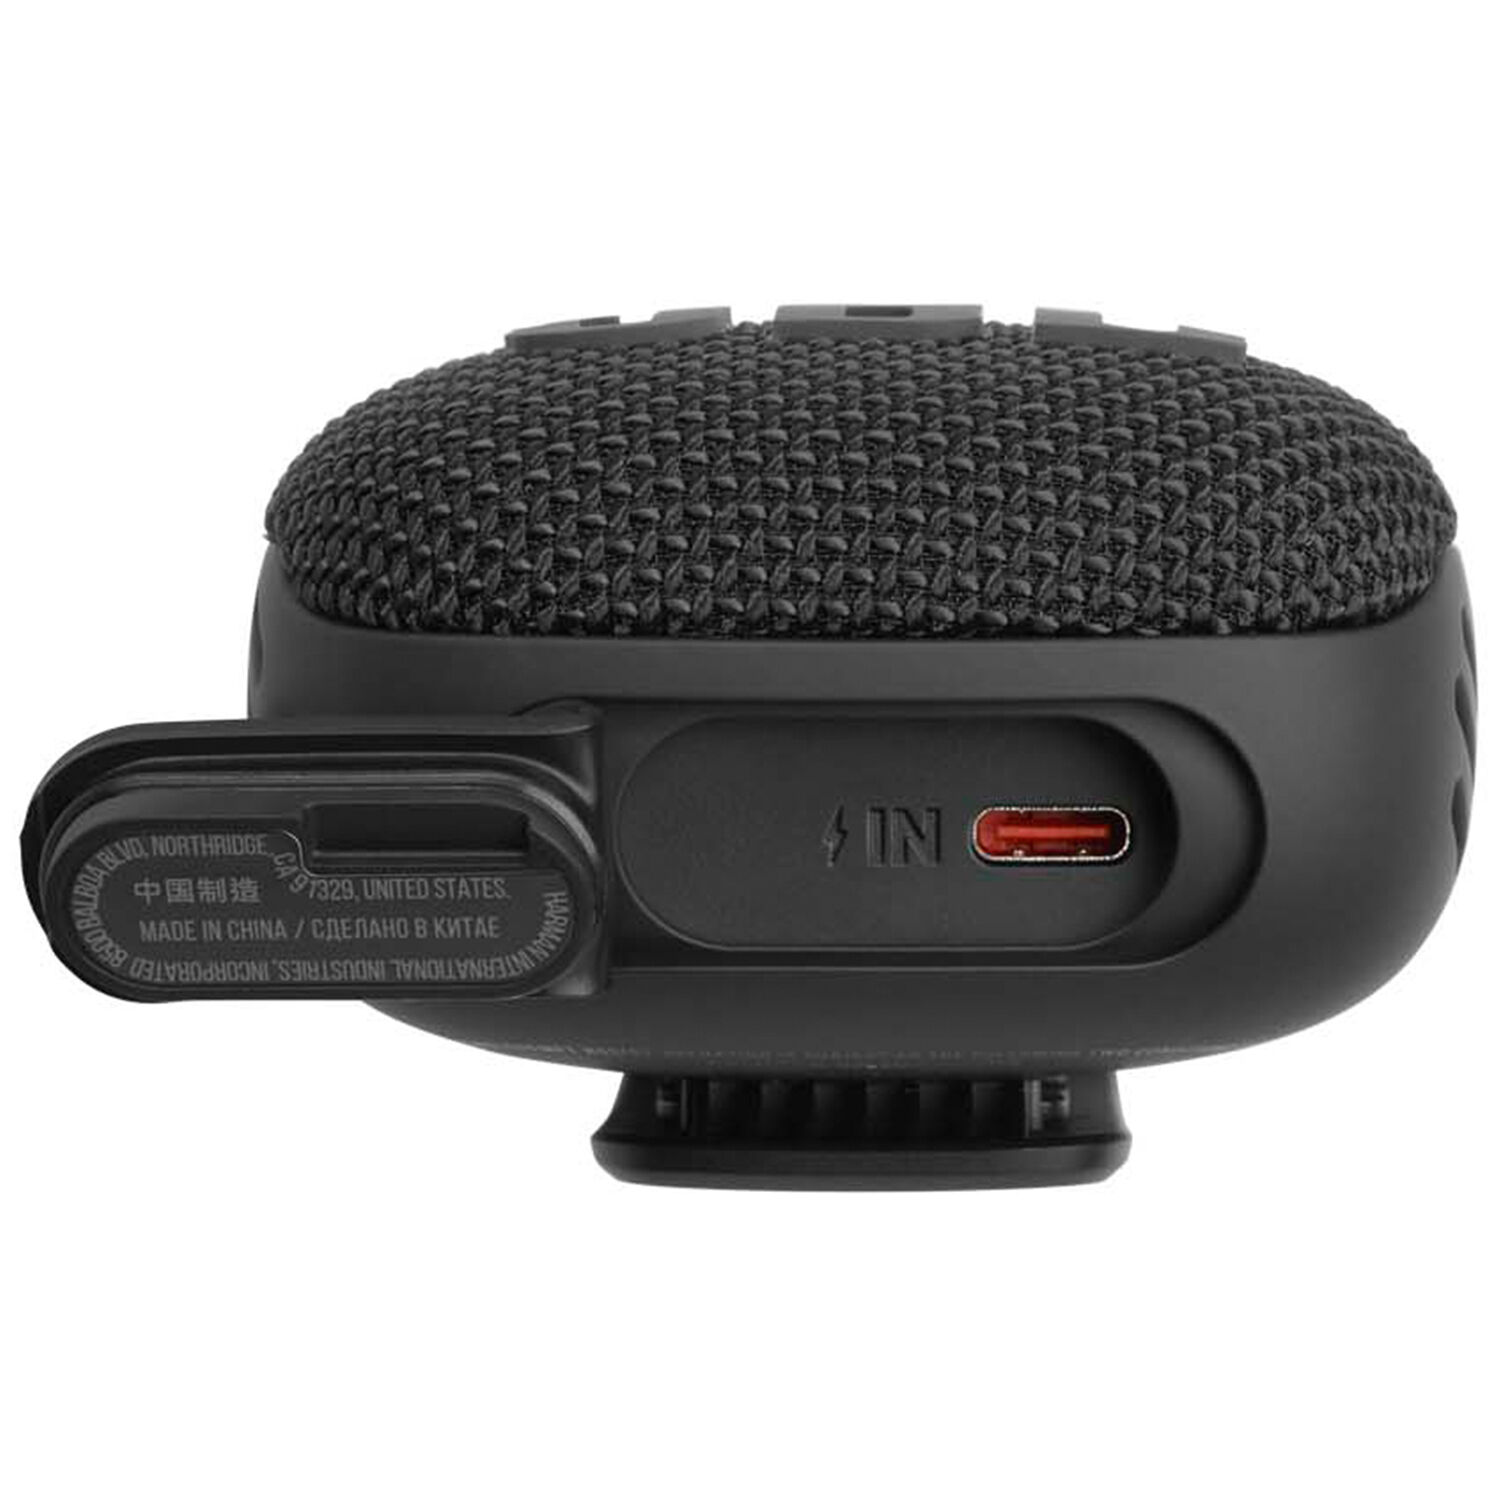 JBL Wind 3S Portable Bluetooth Speaker for Cycles - Black | P.C. 